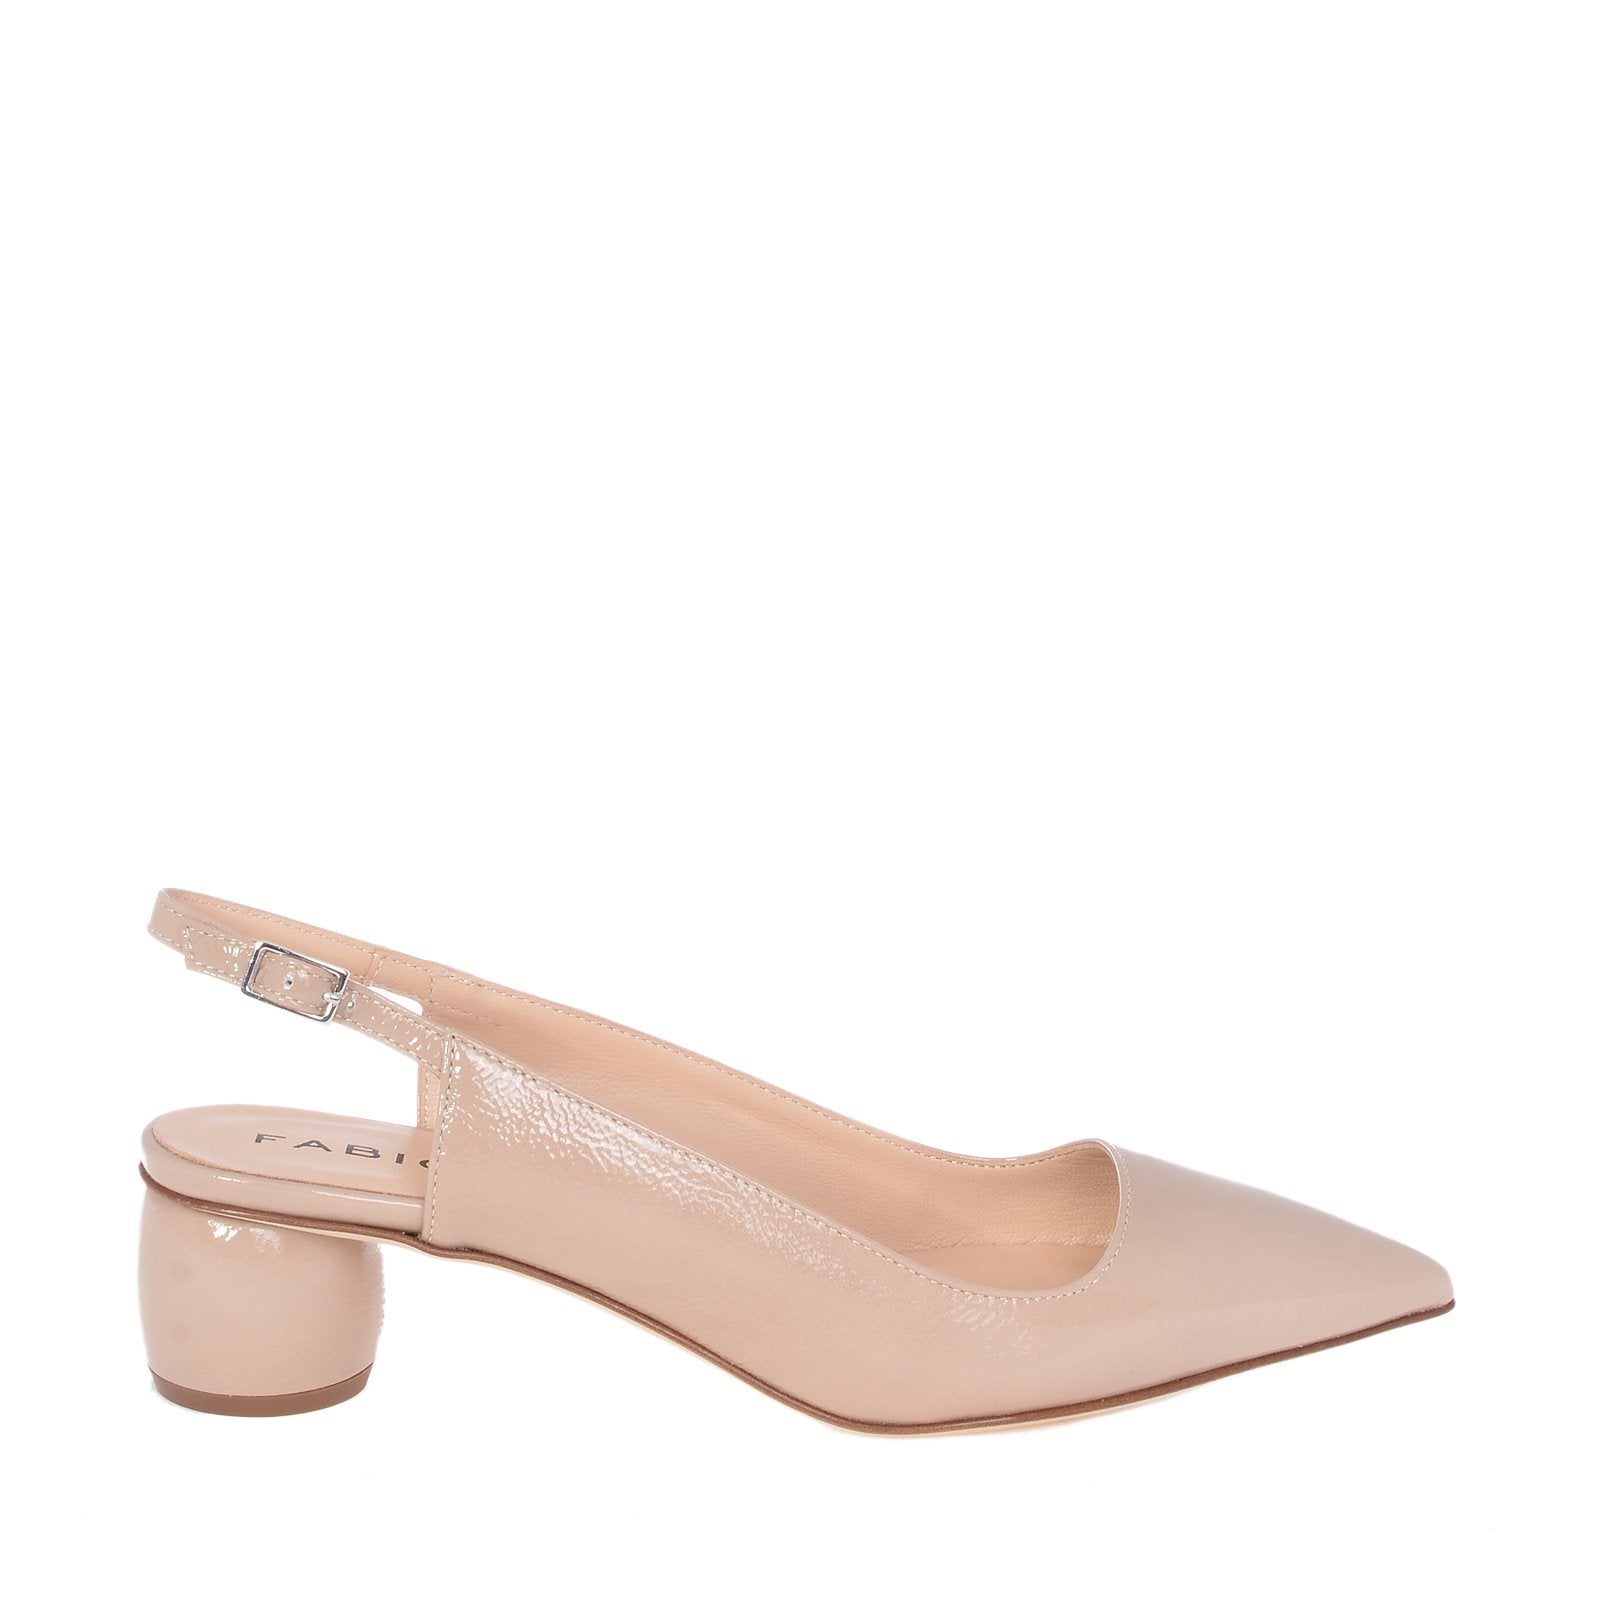 Naplak Leather Slingback Shoes In Nude Heels NUDE2382 - 1